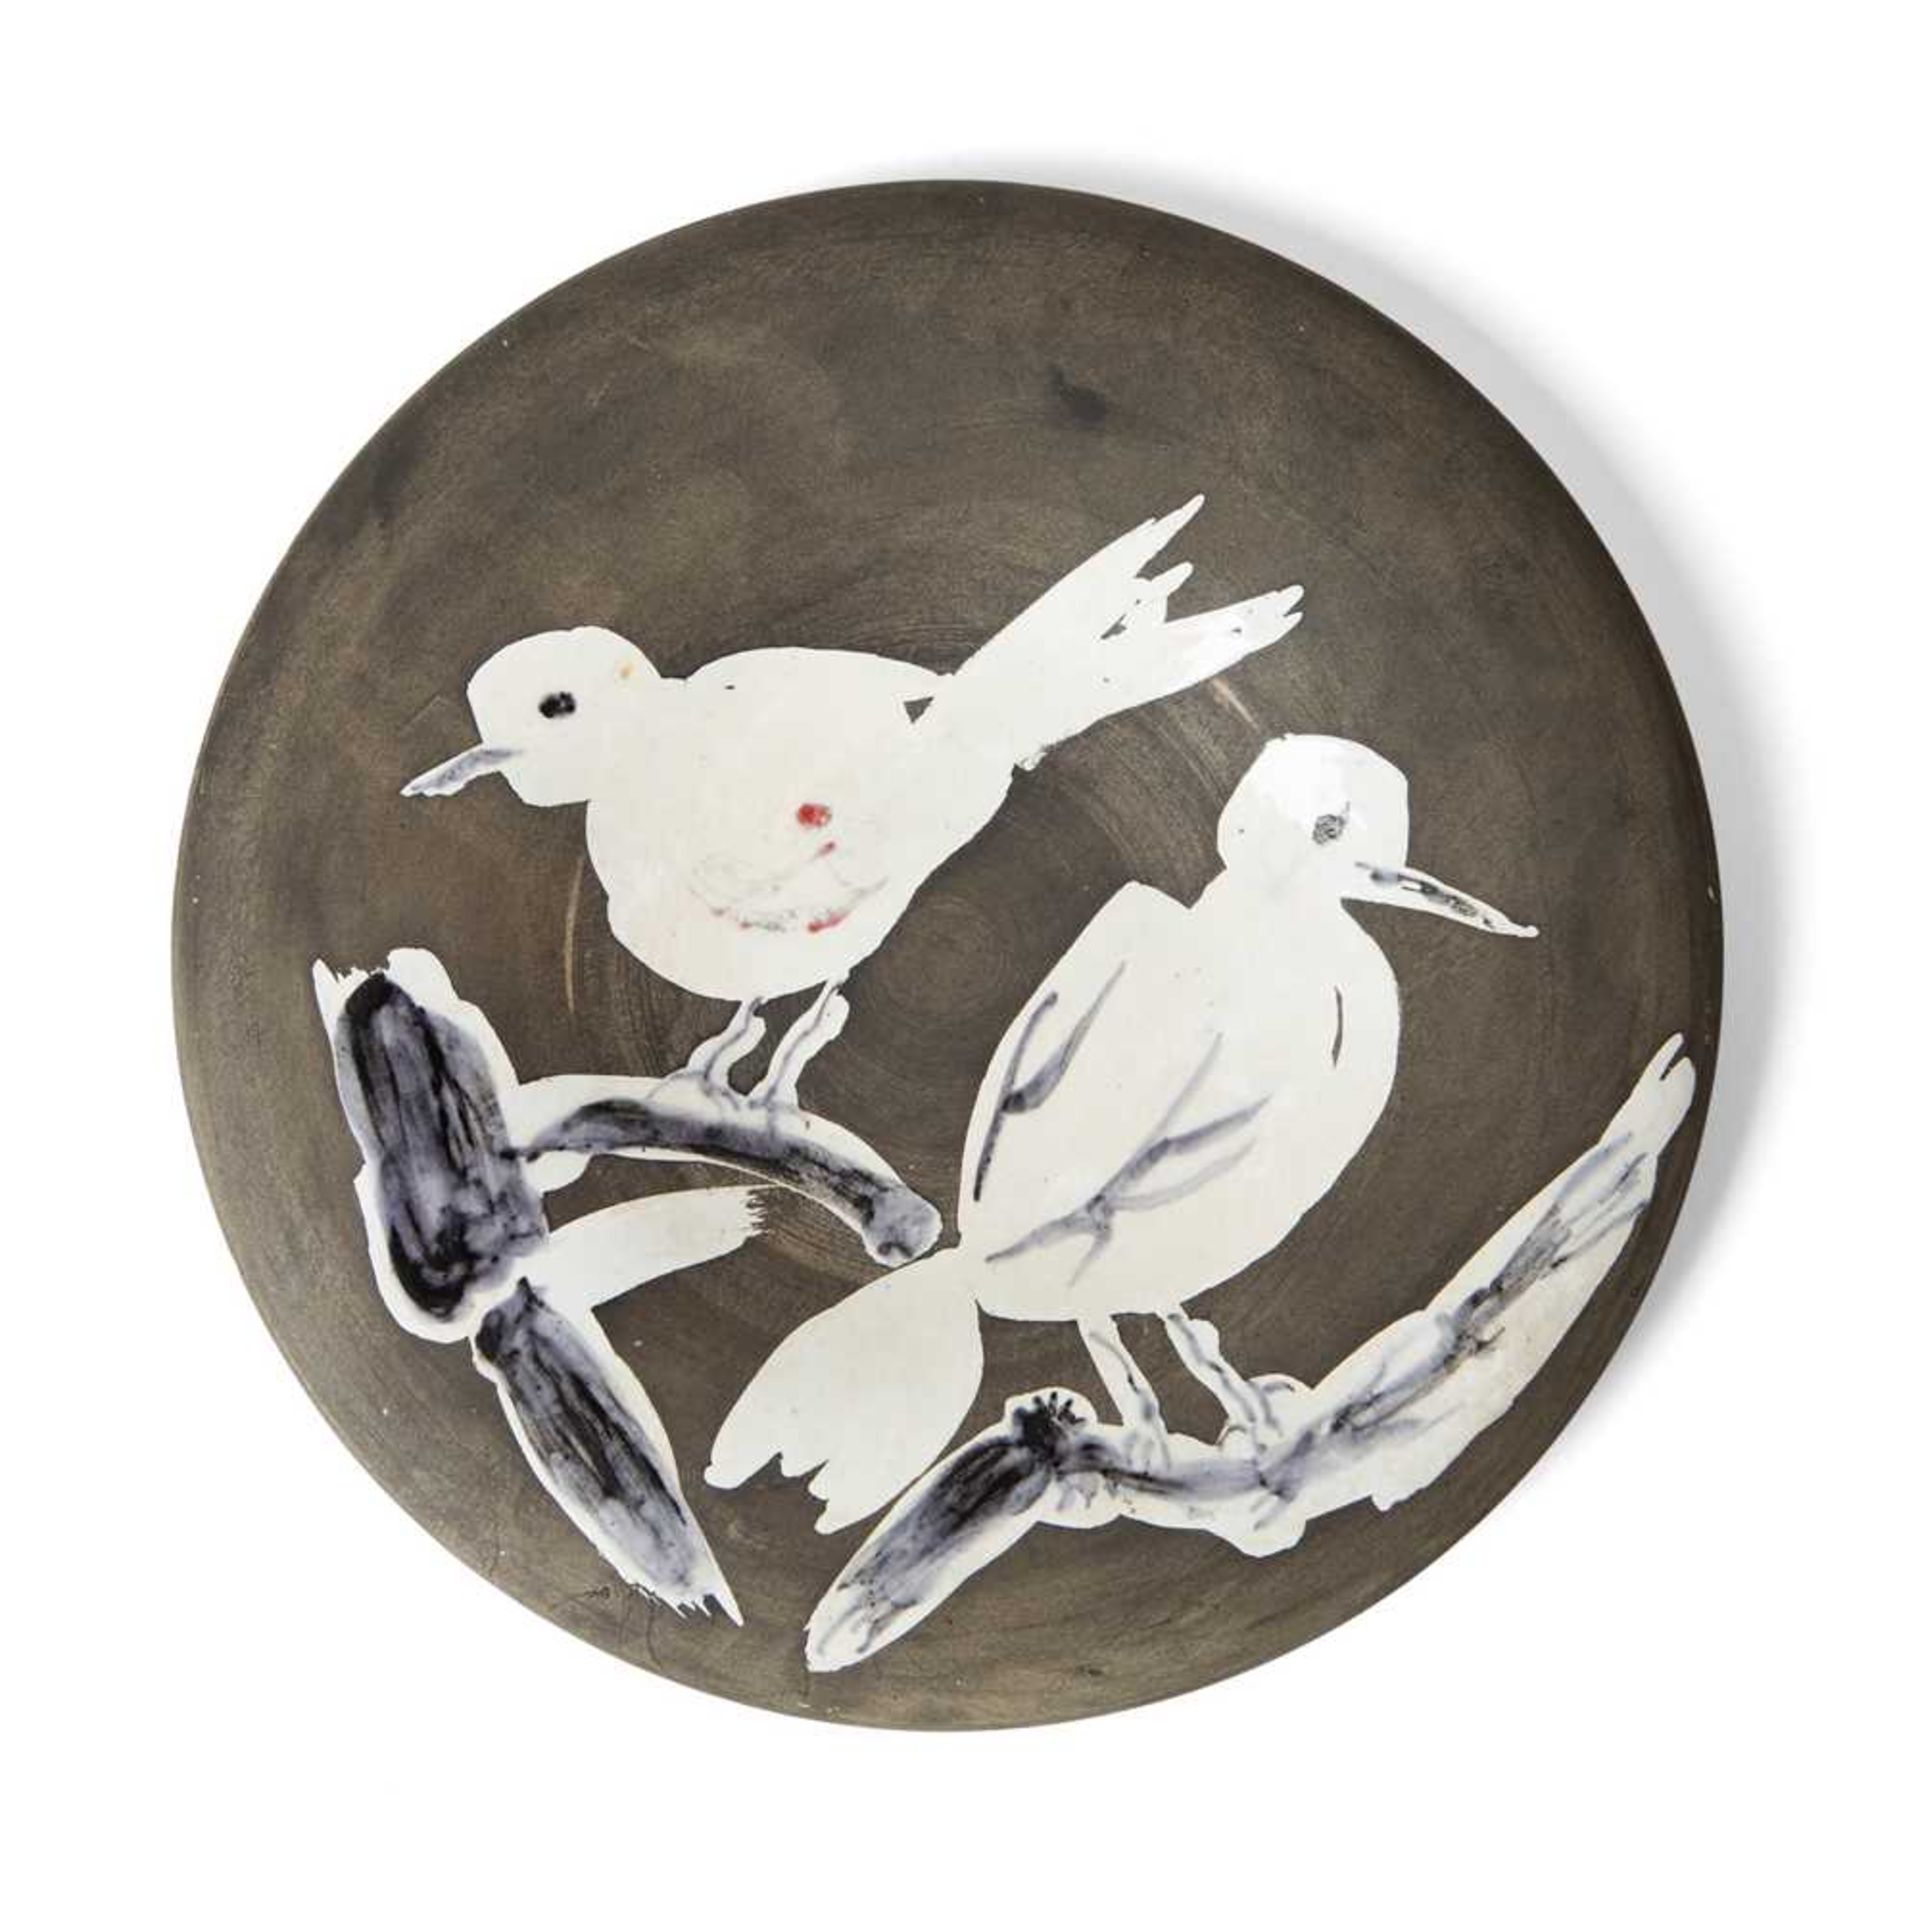 § Pablo Picasso (Spanish 1881-1973) for Madoura Pottery Deux Oiseaux (no. 95, A.R.487), Conceived 19